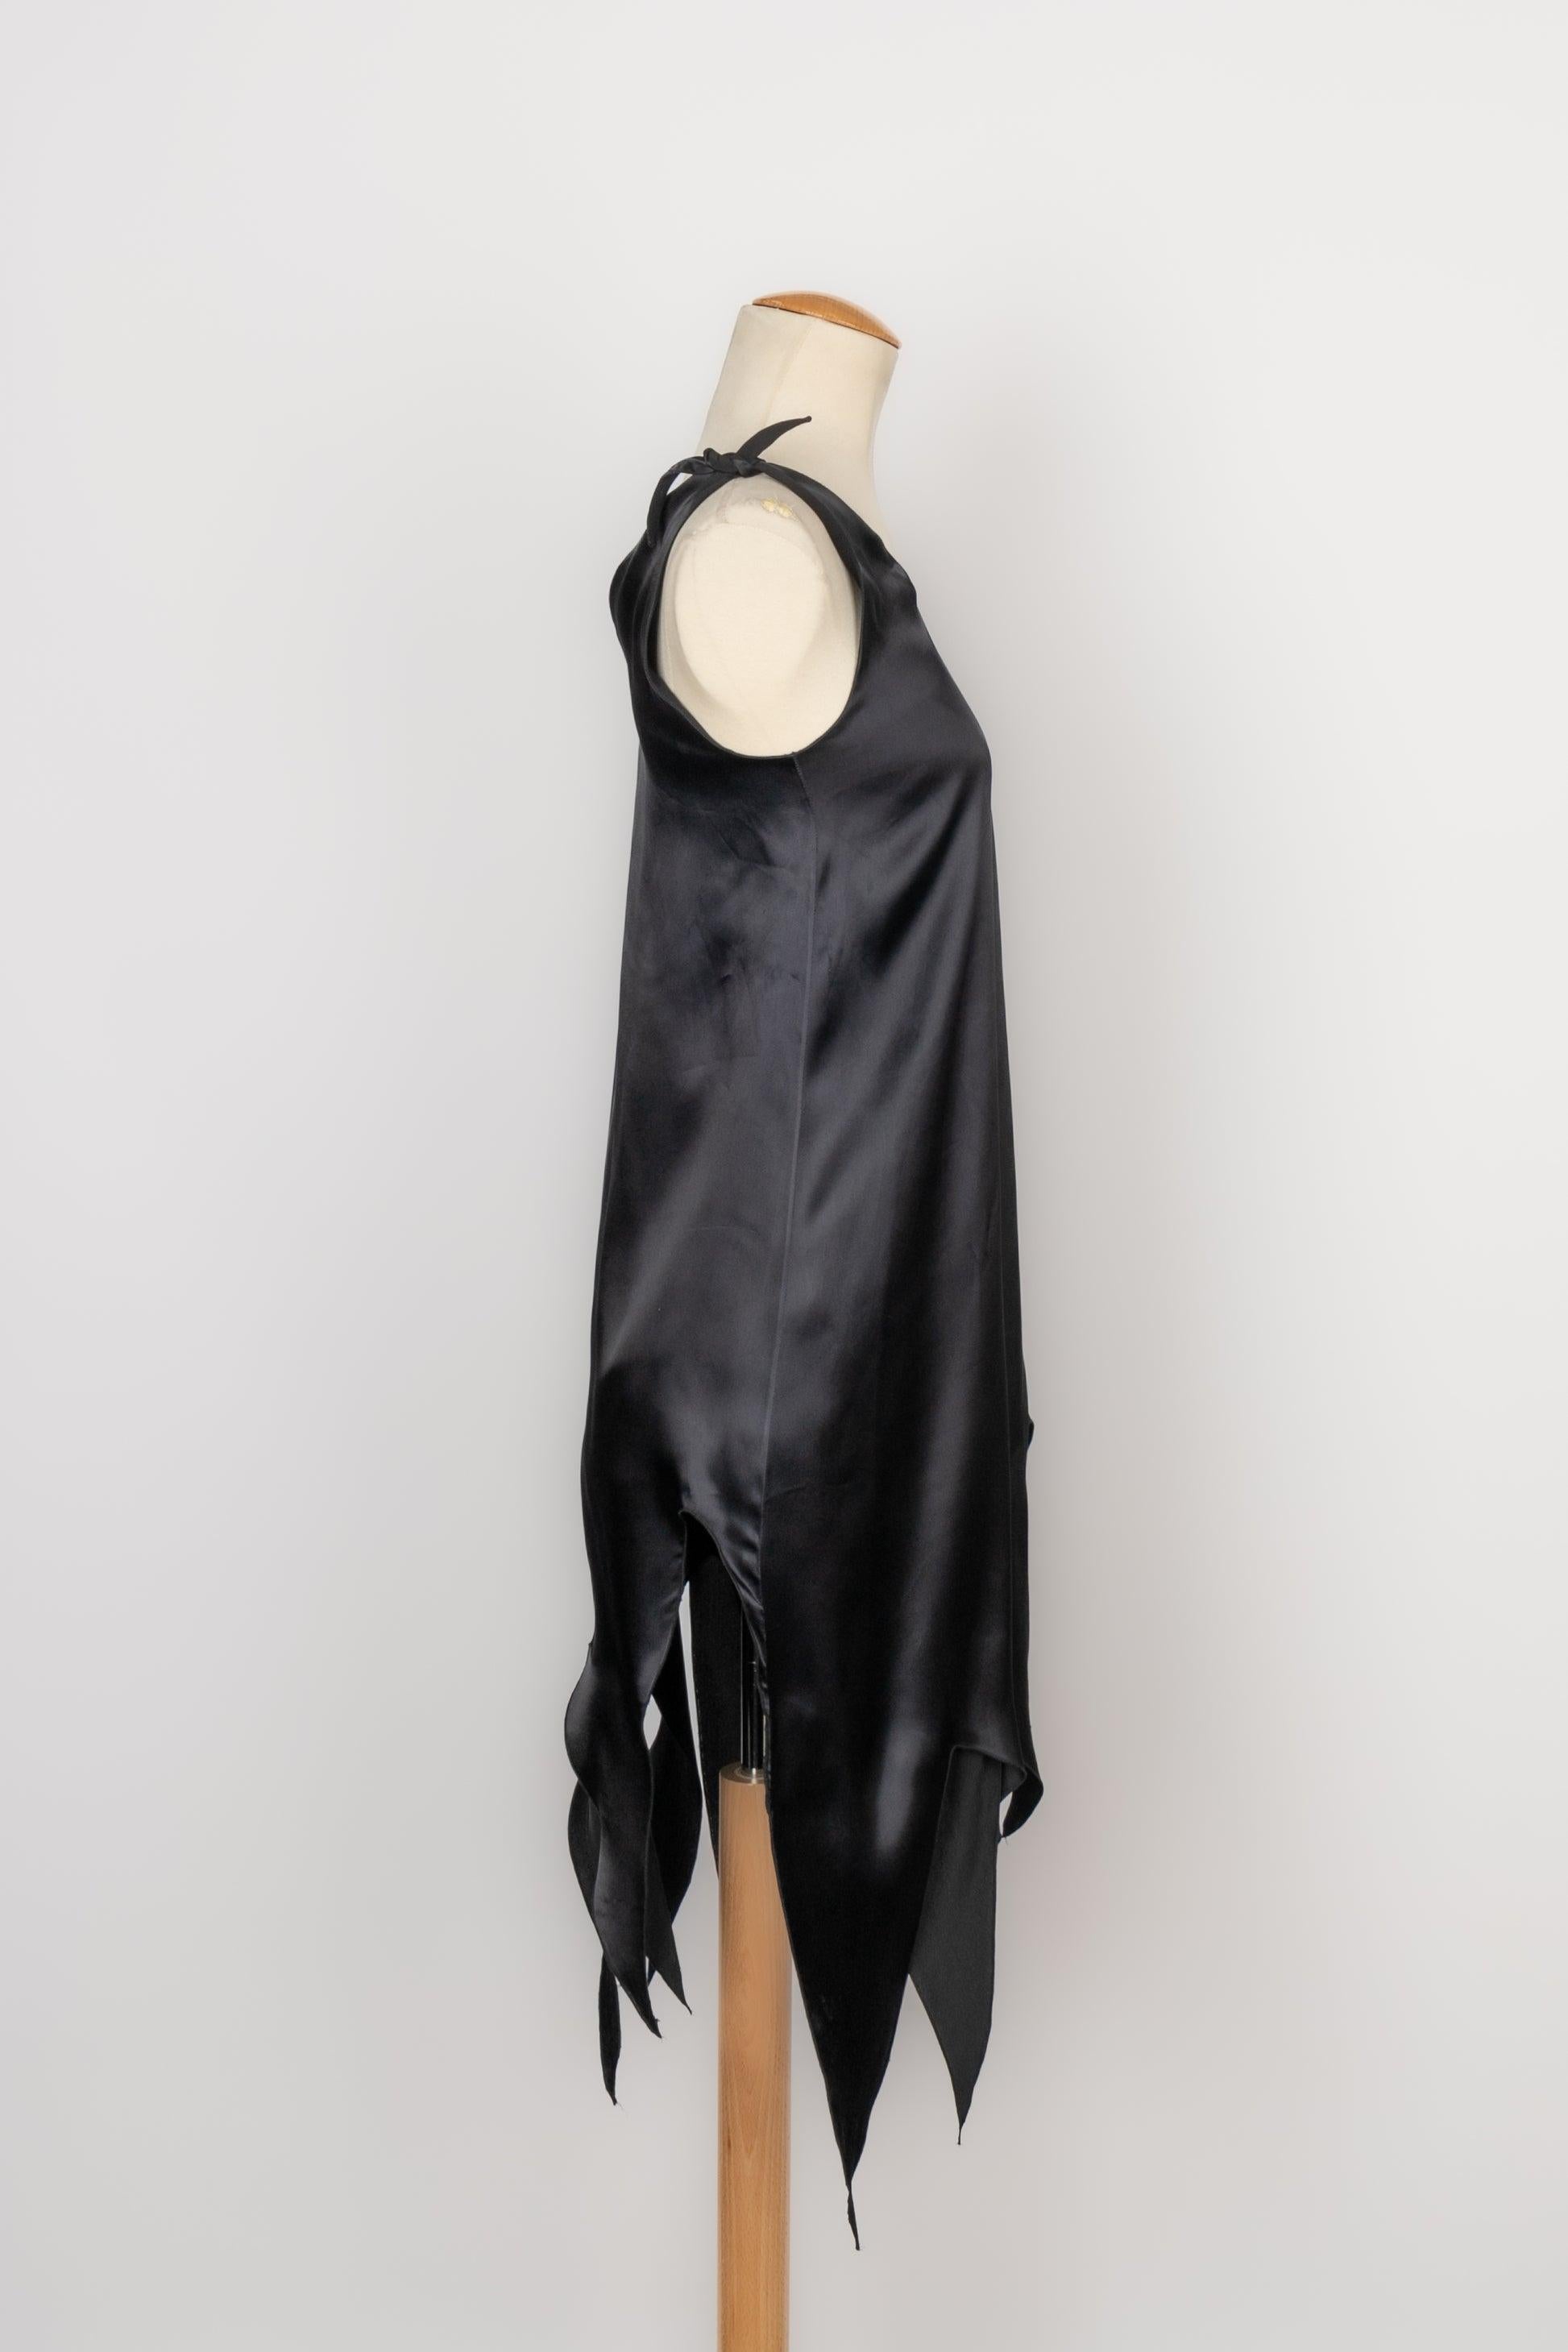 Givenchy - Asymmetrical dress in black satin. No size indicated, it fits a 36FR/38FR. Catwalk model.

Additional information:
Condition: Very good condition
Dimensions: Chest: 40 cm - Length: 88 cm to 117 cm

Seller Reference: VR223